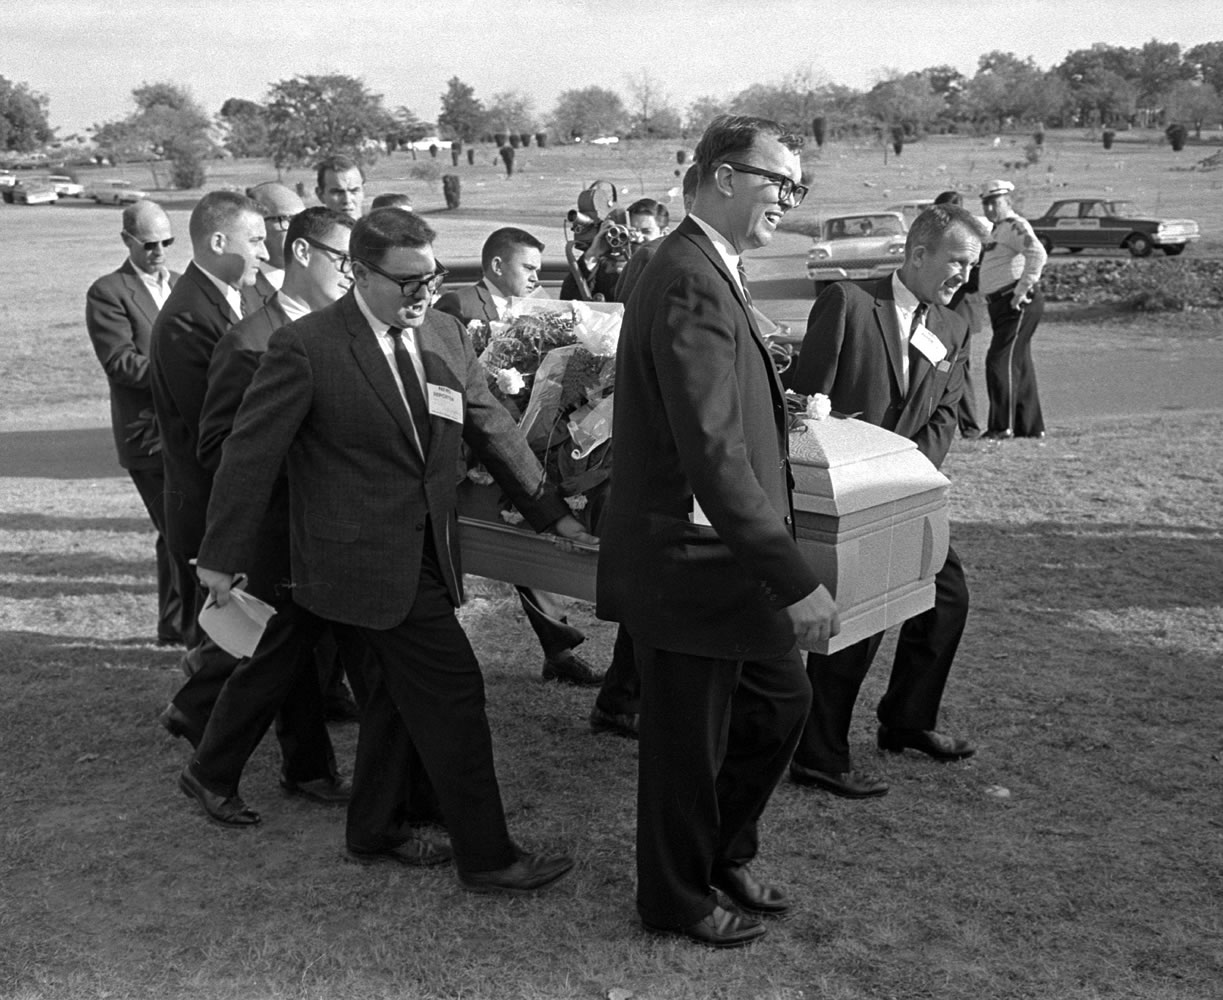 This file photo shows reporters that were enlisted to act as pall bearers at the interment of Lee Harvey Oswald at the Shannon Rose Hill Cemetery in Fort Worth, Texas. A Tarrant County judge on Friday, Jan. 30, 2015, said the original casket in which Lee Harvey Oswald was buried belongs to Oswald's brother, not the funeral home that auctioned it off for more than $87,000. The judge ordered the funeral home to pay the same amount of money in damages to Robert Oswald, saying its conduct was &quot;malicious and wanton.&quot; Pallbearers from left end - Jerry Flemmons with crewcut and no glasses. In front of Flemmons are reporters Ed Horn and Mike Cochran. Funeral director Paul J. Groody was among the pallbearers. On the far side of the casket are Jon McConal, rear, and Preston McGraw, front. The pallbearer obscured behind Groody could not be identified.